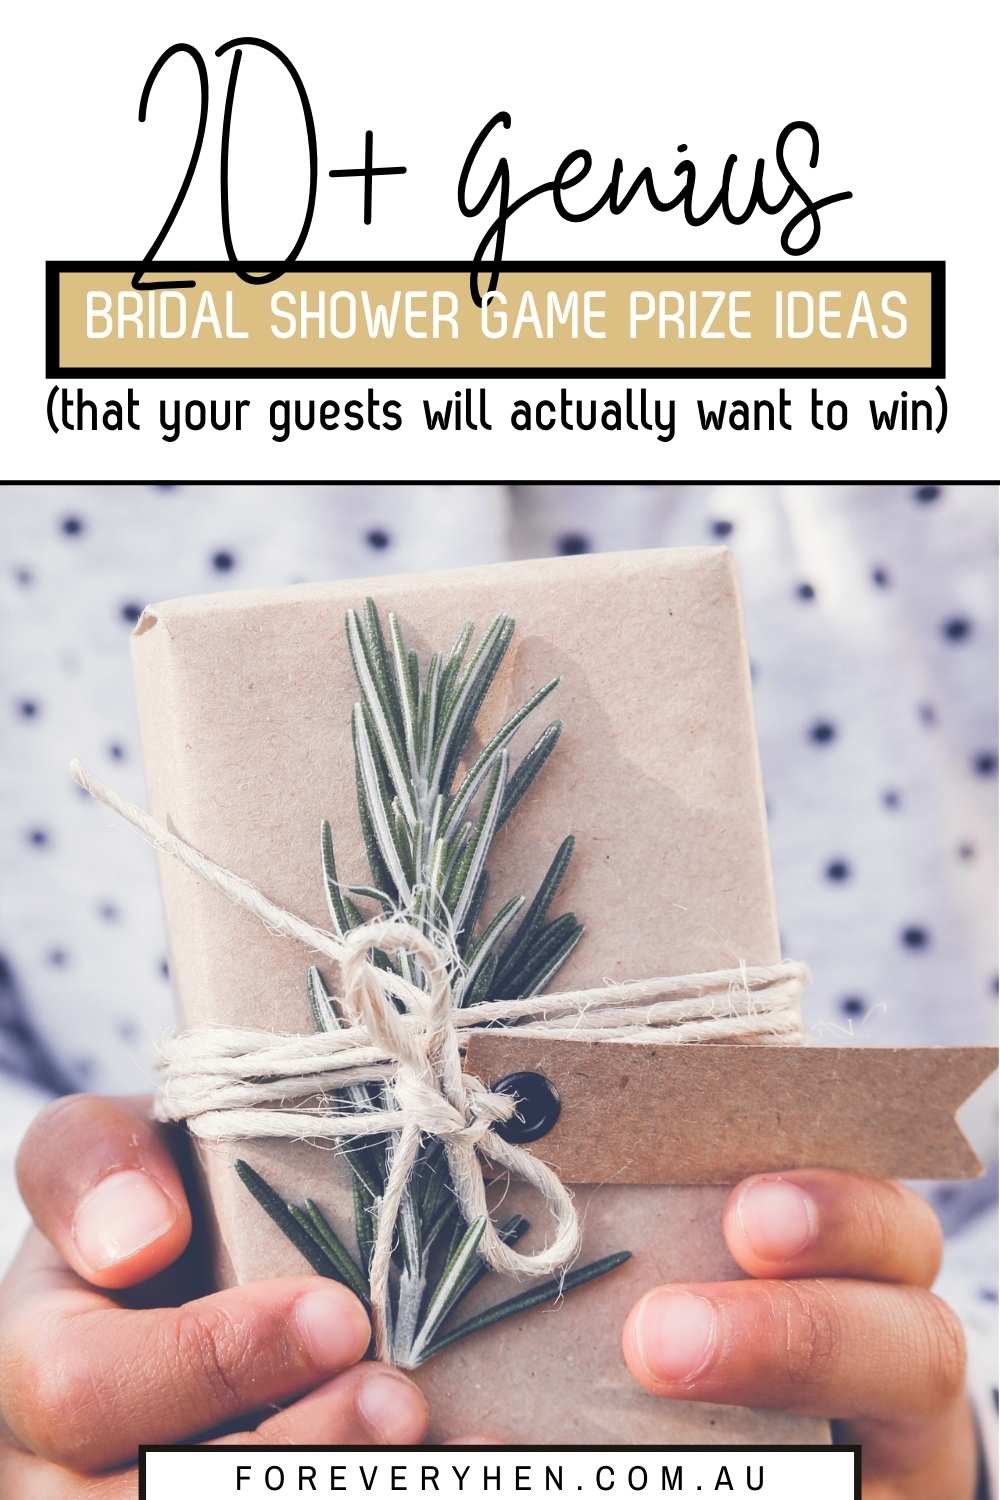 Ideas for Bridal Shower Prizes